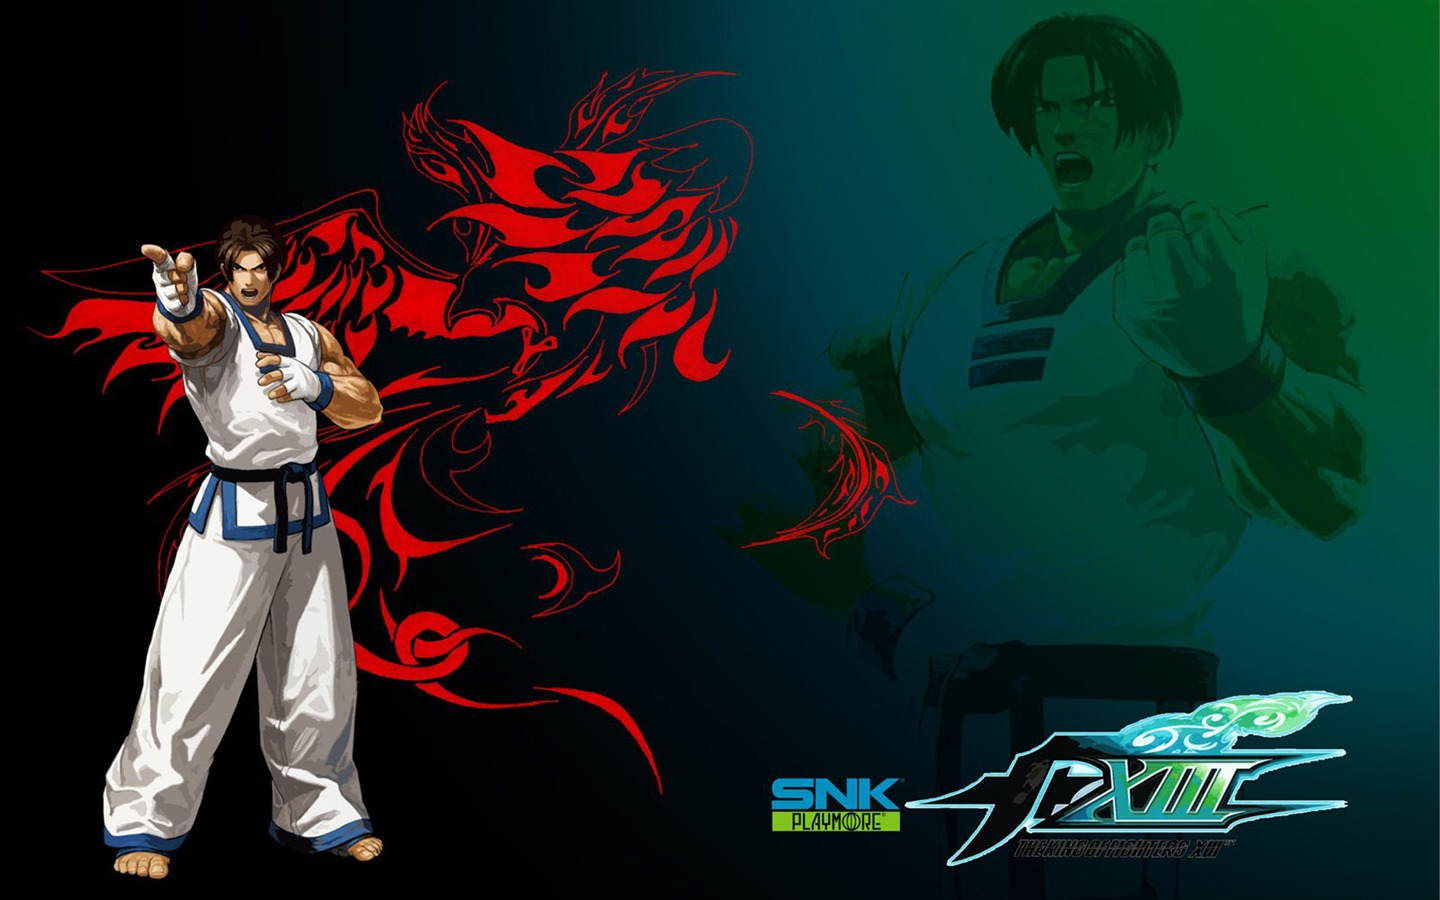 The King of Fighters XIII wallpapers #14 - 1440x900